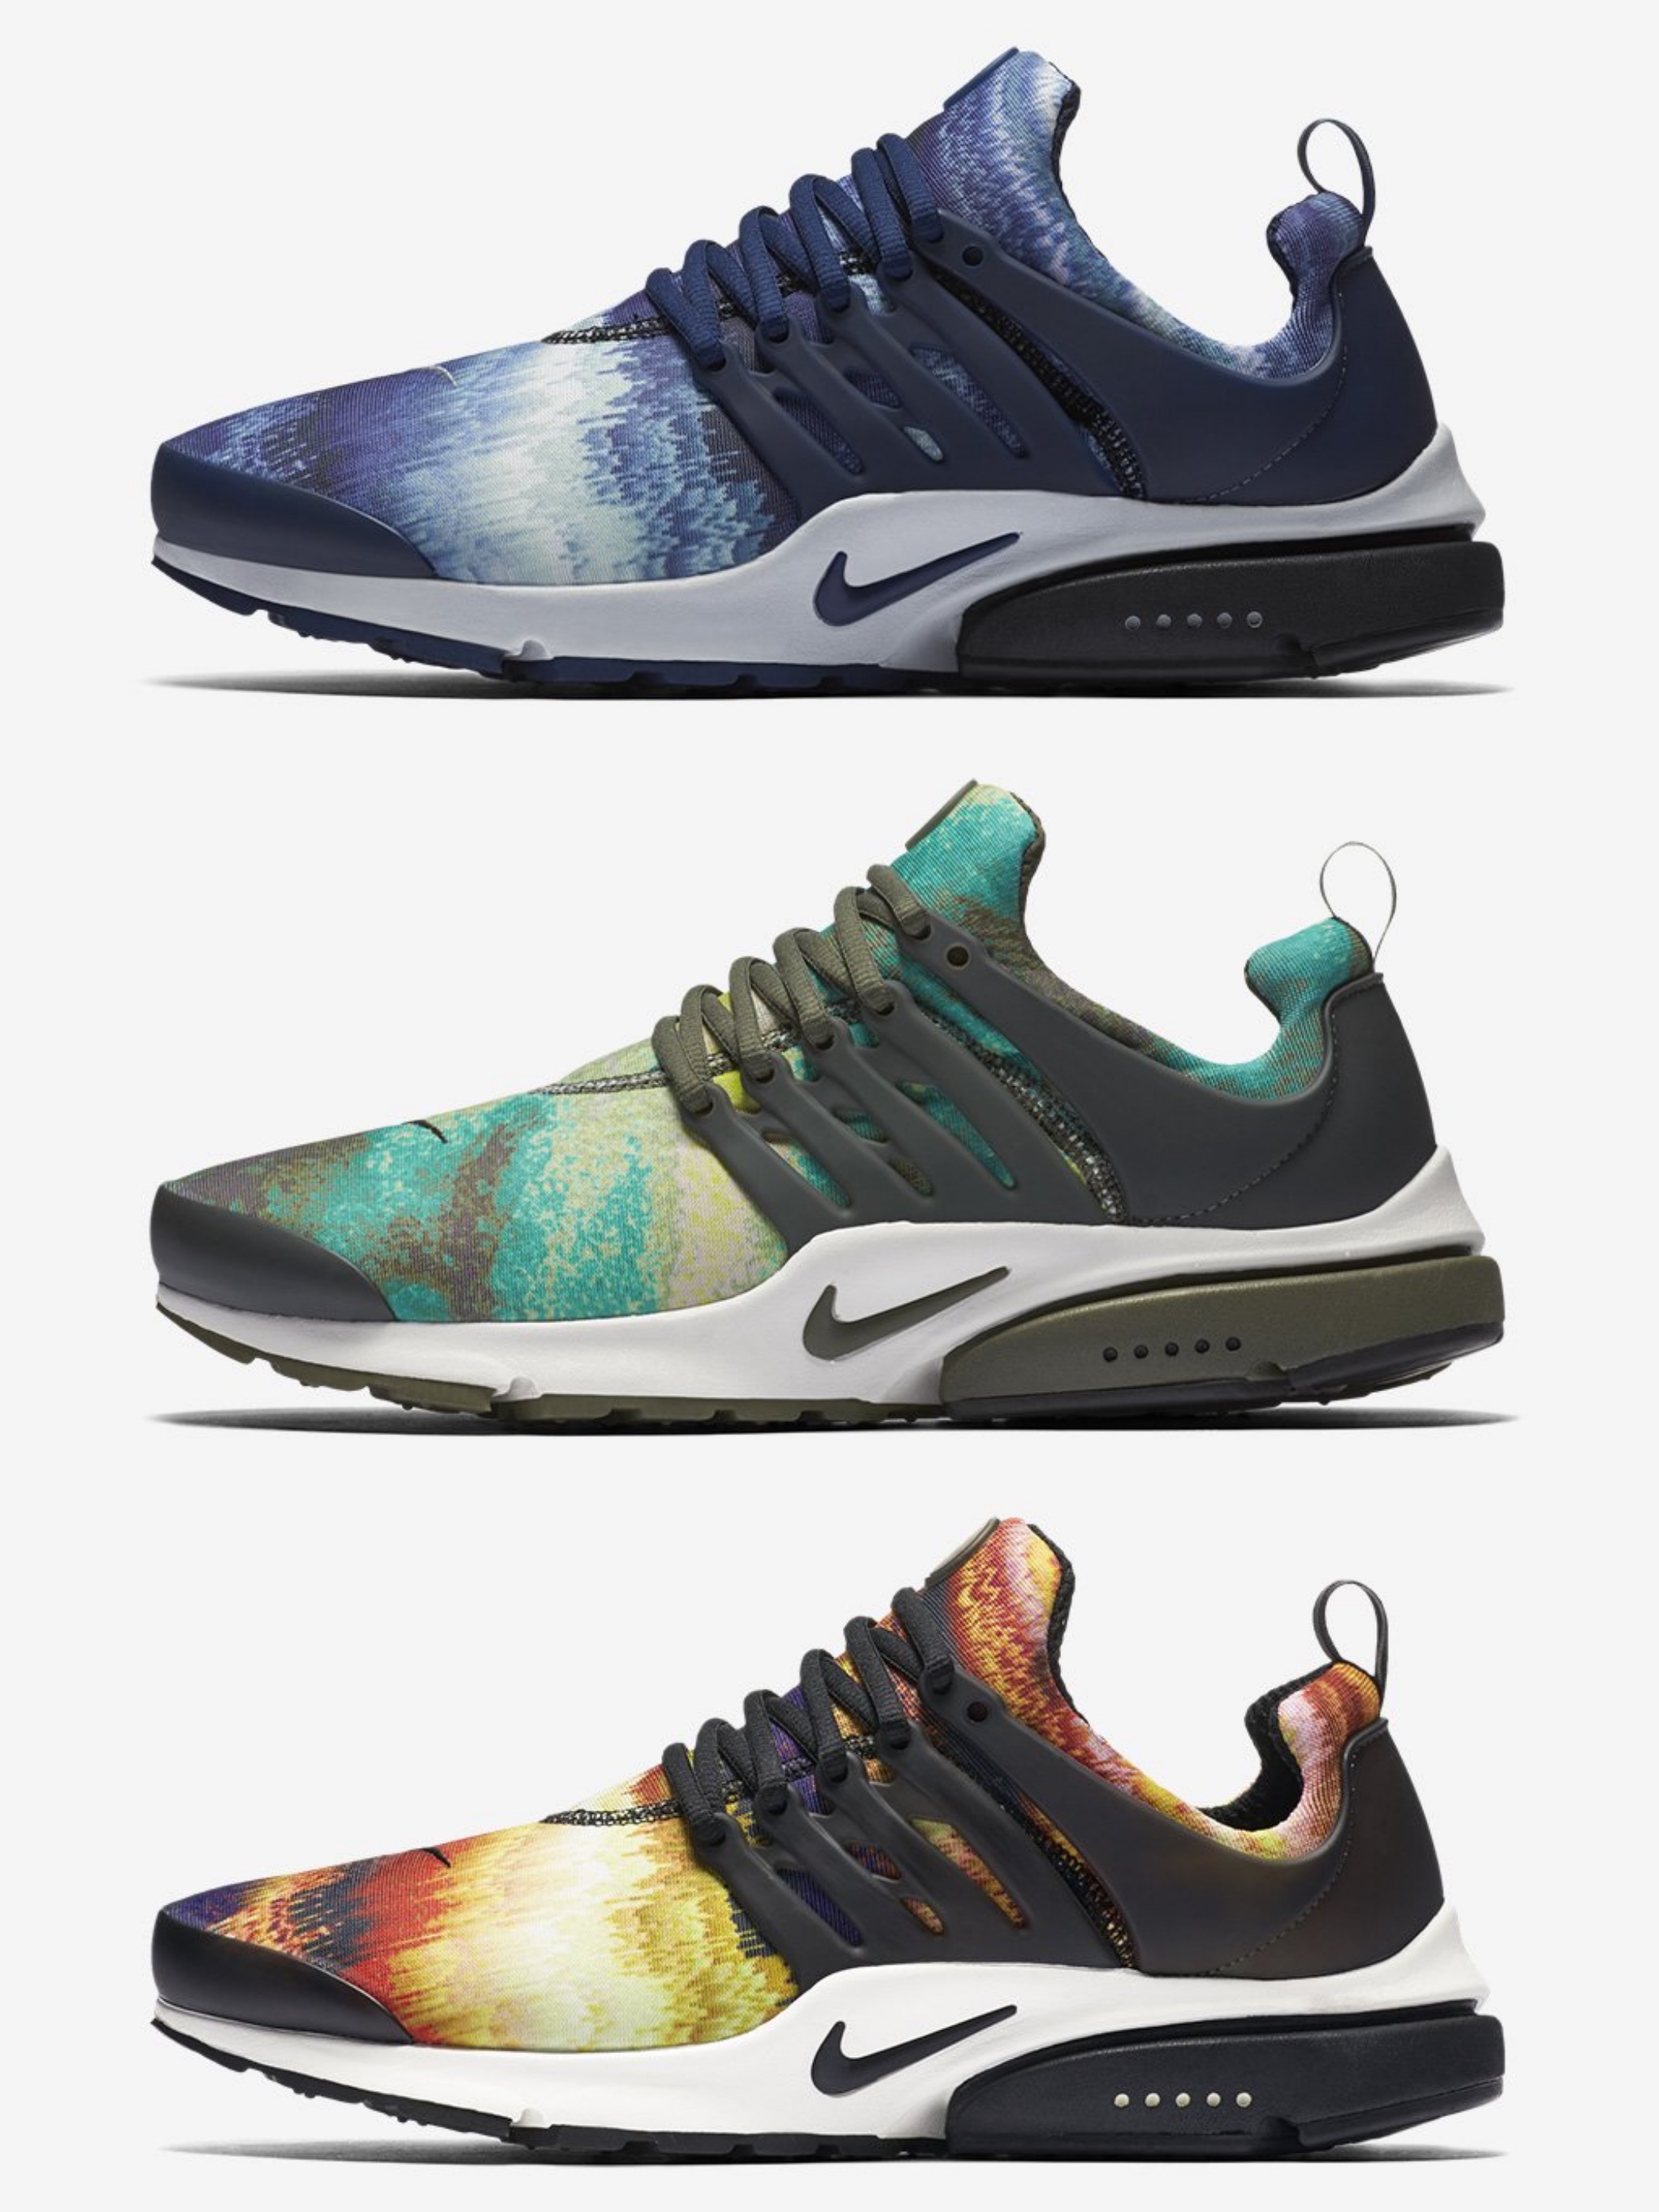 Abiertamente importante Empírico Pick Fire, Grass, or Water with This Nike Air Presto GPX Pack - WearTesters